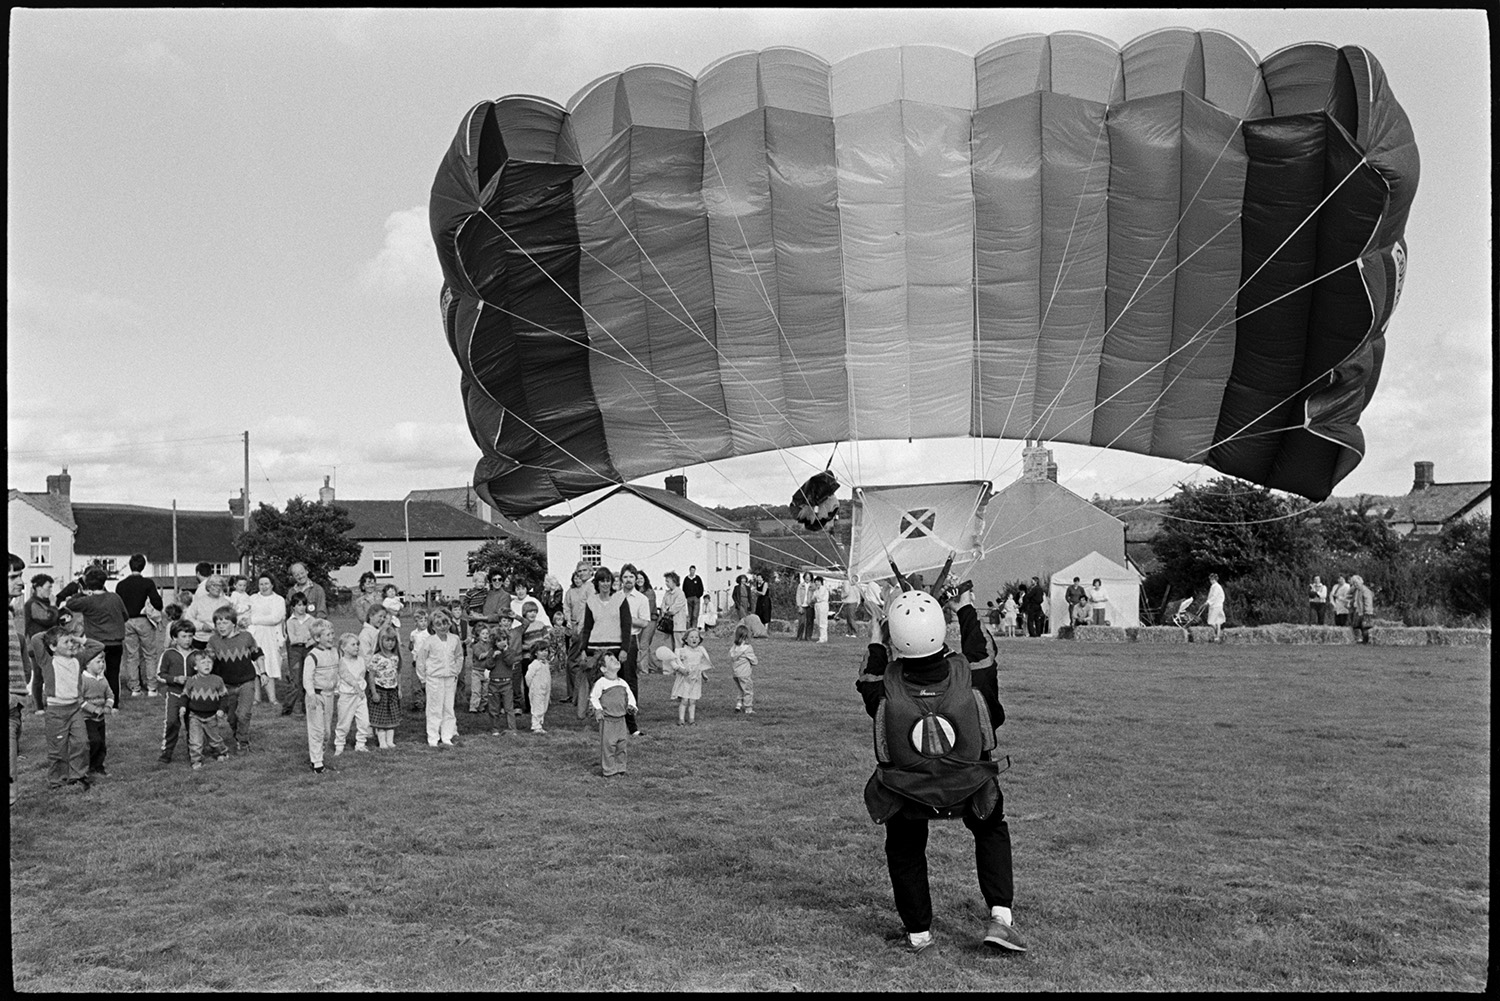 Sports Day, parachute landing races and spectators. 
[A parachutists who has just landed at Dolton School sports day, demonstrating their parachute for the children and adults at the sports day.]